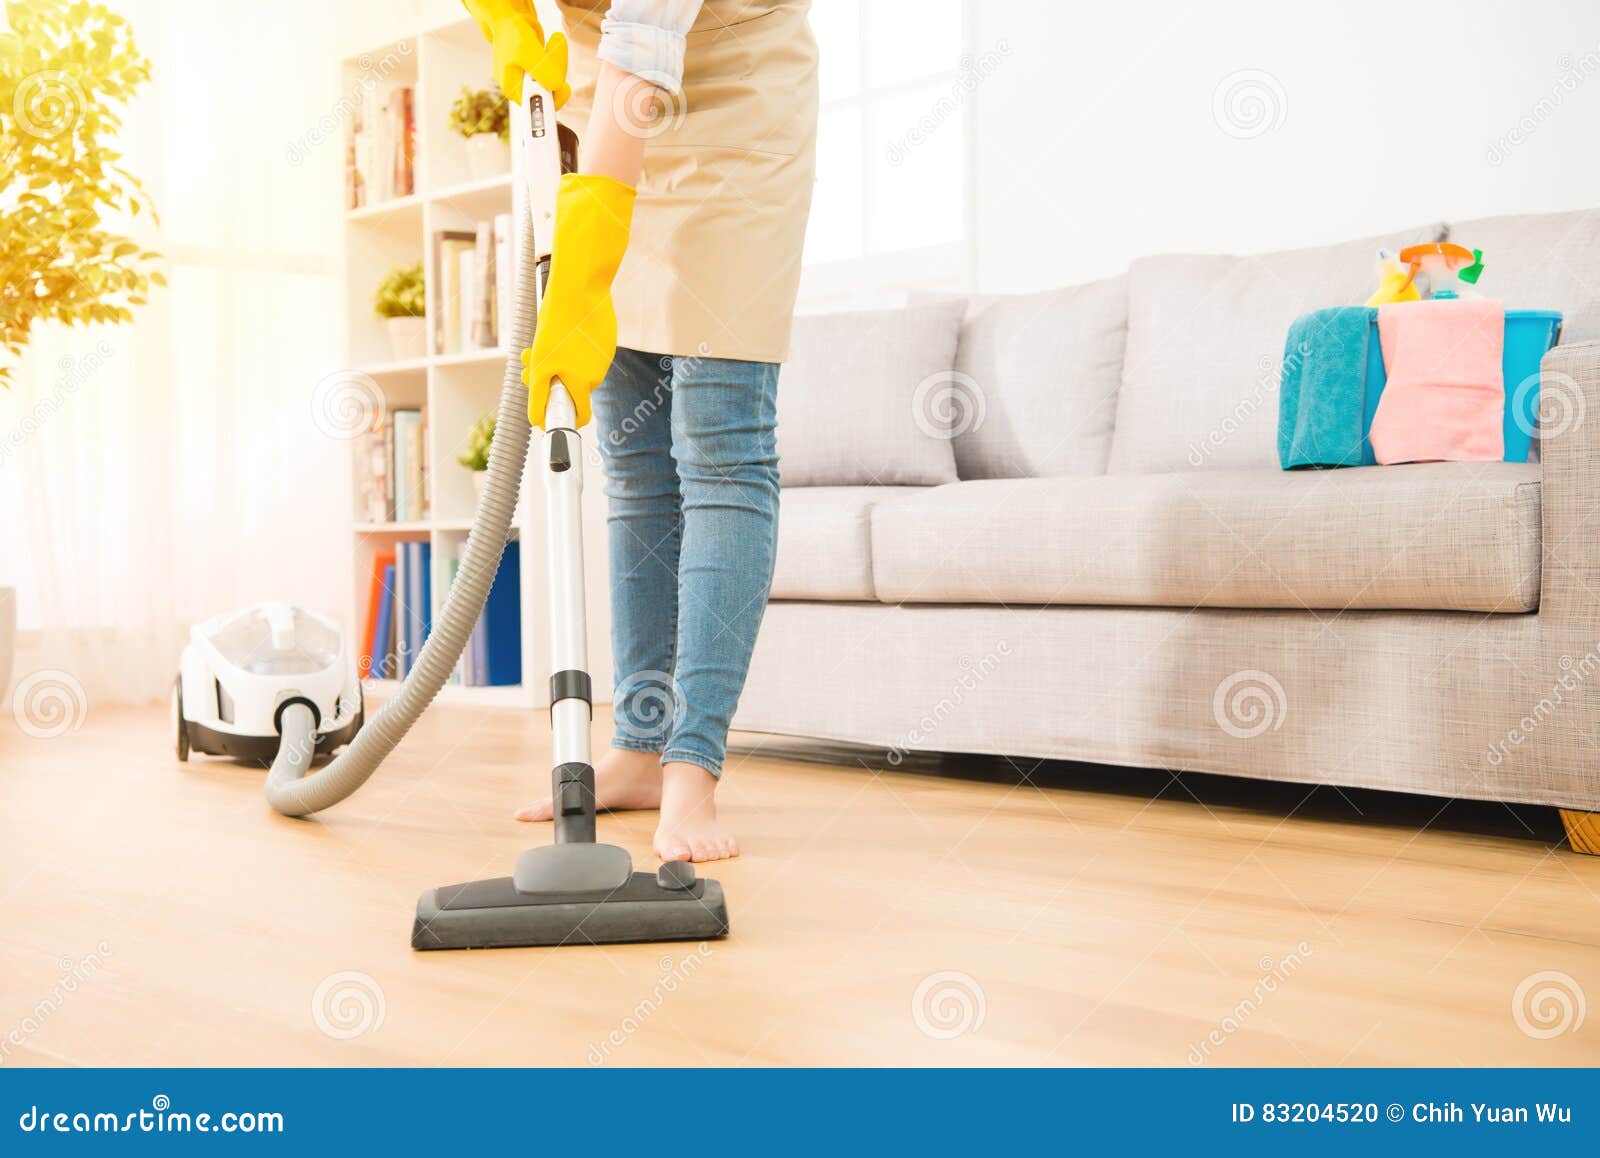 woman use vacuum cleaner to cleaning